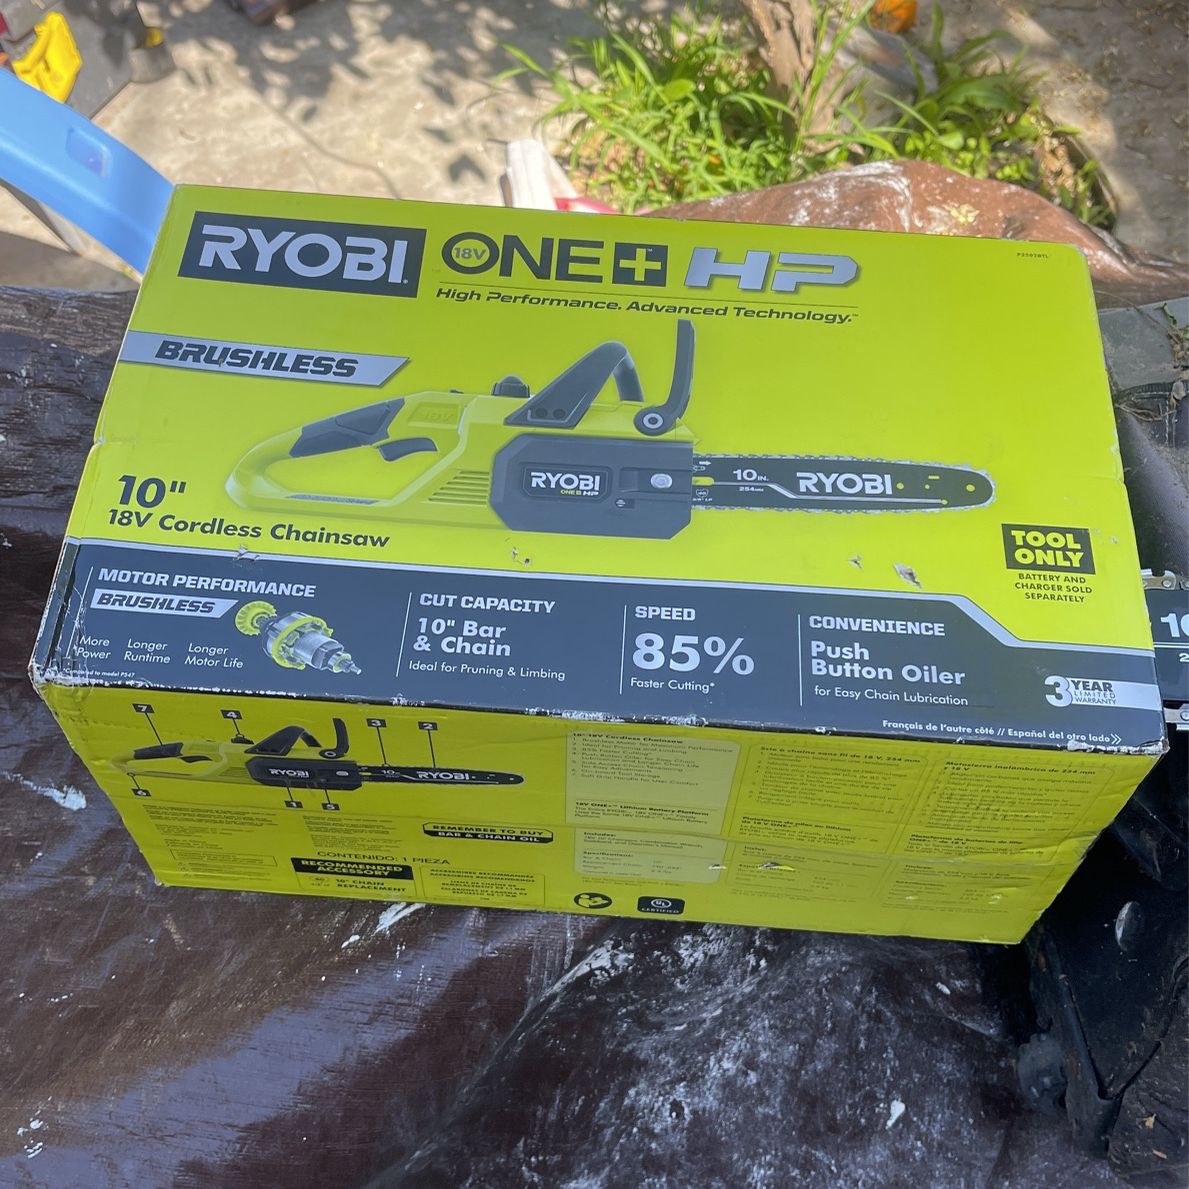 RYOBI ONE+ HP 18V Brushless 10 in. Battery Chainsaw (Tool Only)